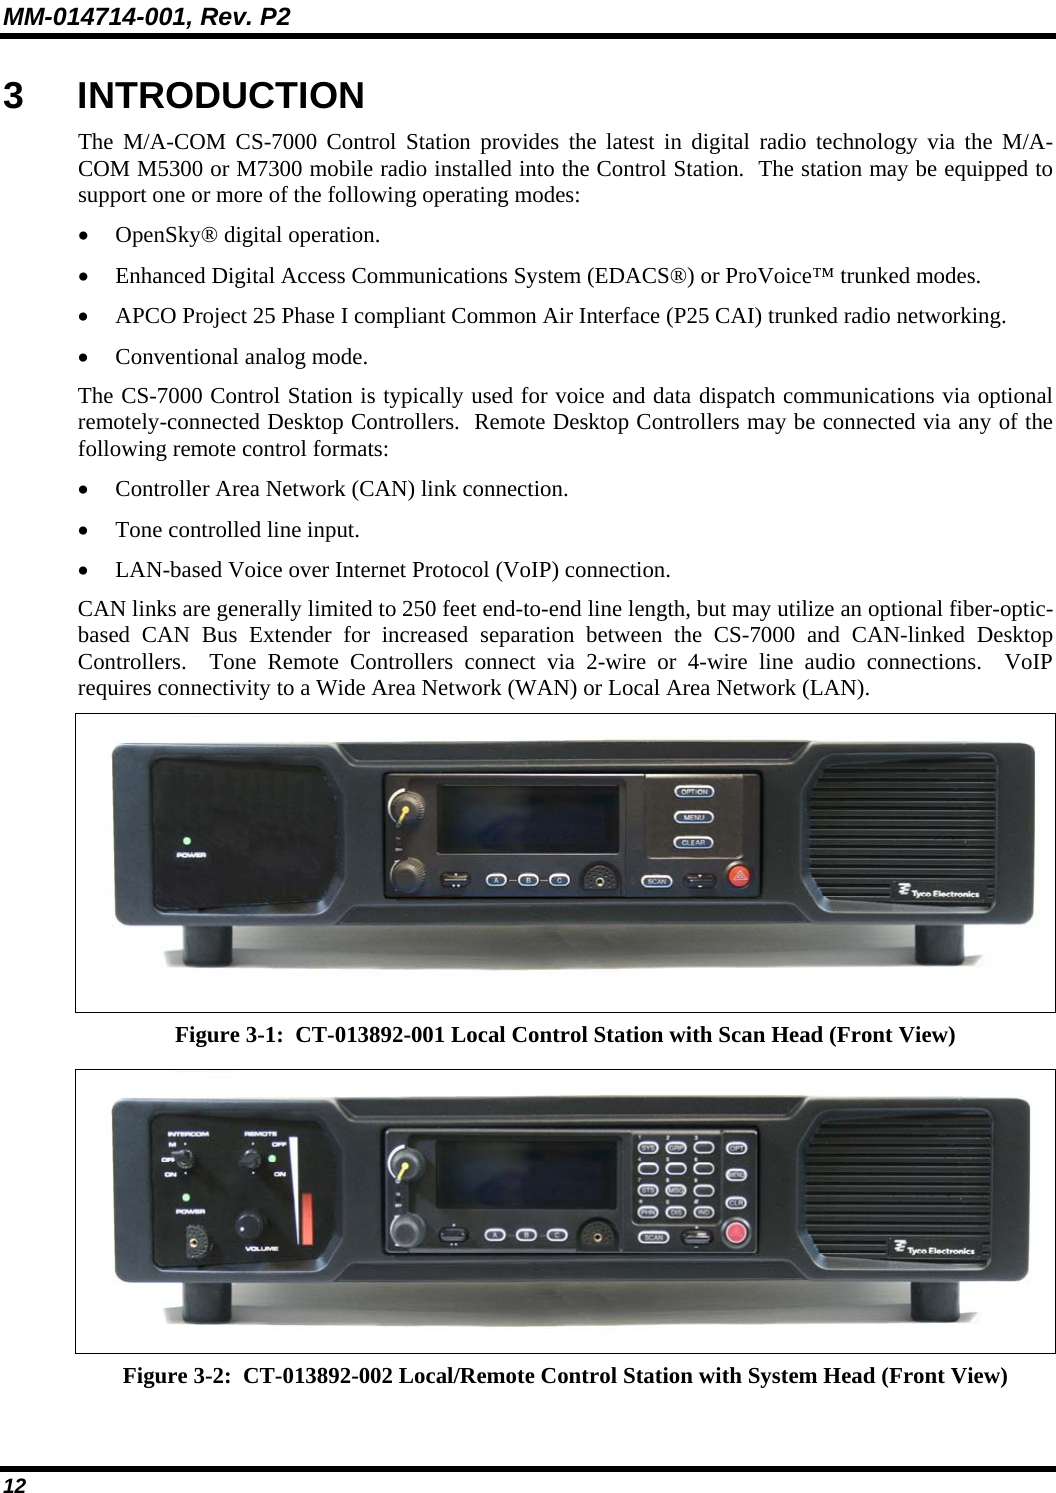 MM-014714-001, Rev. P2 12 3 INTRODUCTION The M/A-COM CS-7000 Control Station provides the latest in digital radio technology via the M/A-COM M5300 or M7300 mobile radio installed into the Control Station.  The station may be equipped to support one or more of the following operating modes: • OpenSky® digital operation. • Enhanced Digital Access Communications System (EDACS®) or ProVoice™ trunked modes. • APCO Project 25 Phase I compliant Common Air Interface (P25 CAI) trunked radio networking. • Conventional analog mode. The CS-7000 Control Station is typically used for voice and data dispatch communications via optional remotely-connected Desktop Controllers.  Remote Desktop Controllers may be connected via any of the following remote control formats: • Controller Area Network (CAN) link connection. • Tone controlled line input. • LAN-based Voice over Internet Protocol (VoIP) connection. CAN links are generally limited to 250 feet end-to-end line length, but may utilize an optional fiber-optic-based CAN Bus Extender for increased separation between the CS-7000 and CAN-linked Desktop Controllers.  Tone Remote Controllers connect via 2-wire or 4-wire line audio connections.  VoIP requires connectivity to a Wide Area Network (WAN) or Local Area Network (LAN).  Figure 3-1:  CT-013892-001 Local Control Station with Scan Head (Front View)  Figure 3-2:  CT-013892-002 Local/Remote Control Station with System Head (Front View) 